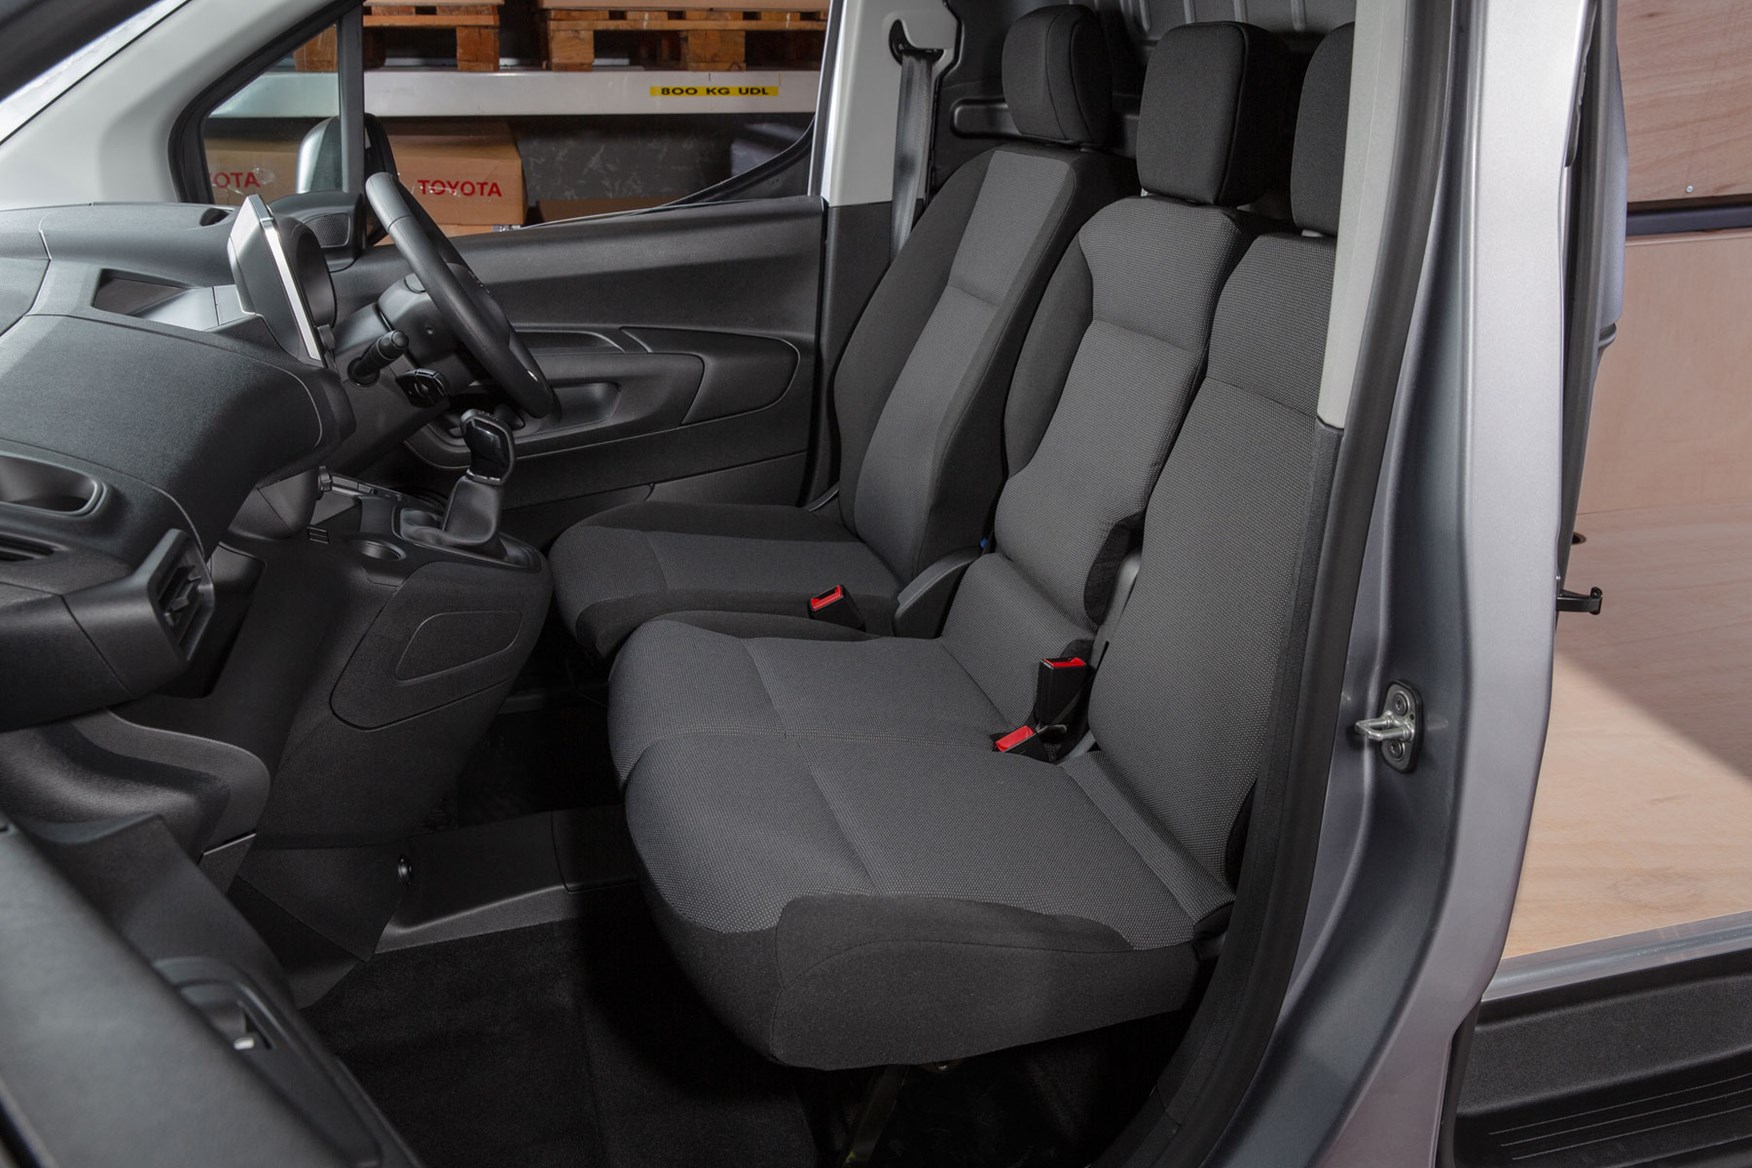 2020 Toyota Proace City review - cab interior, double passenger seat